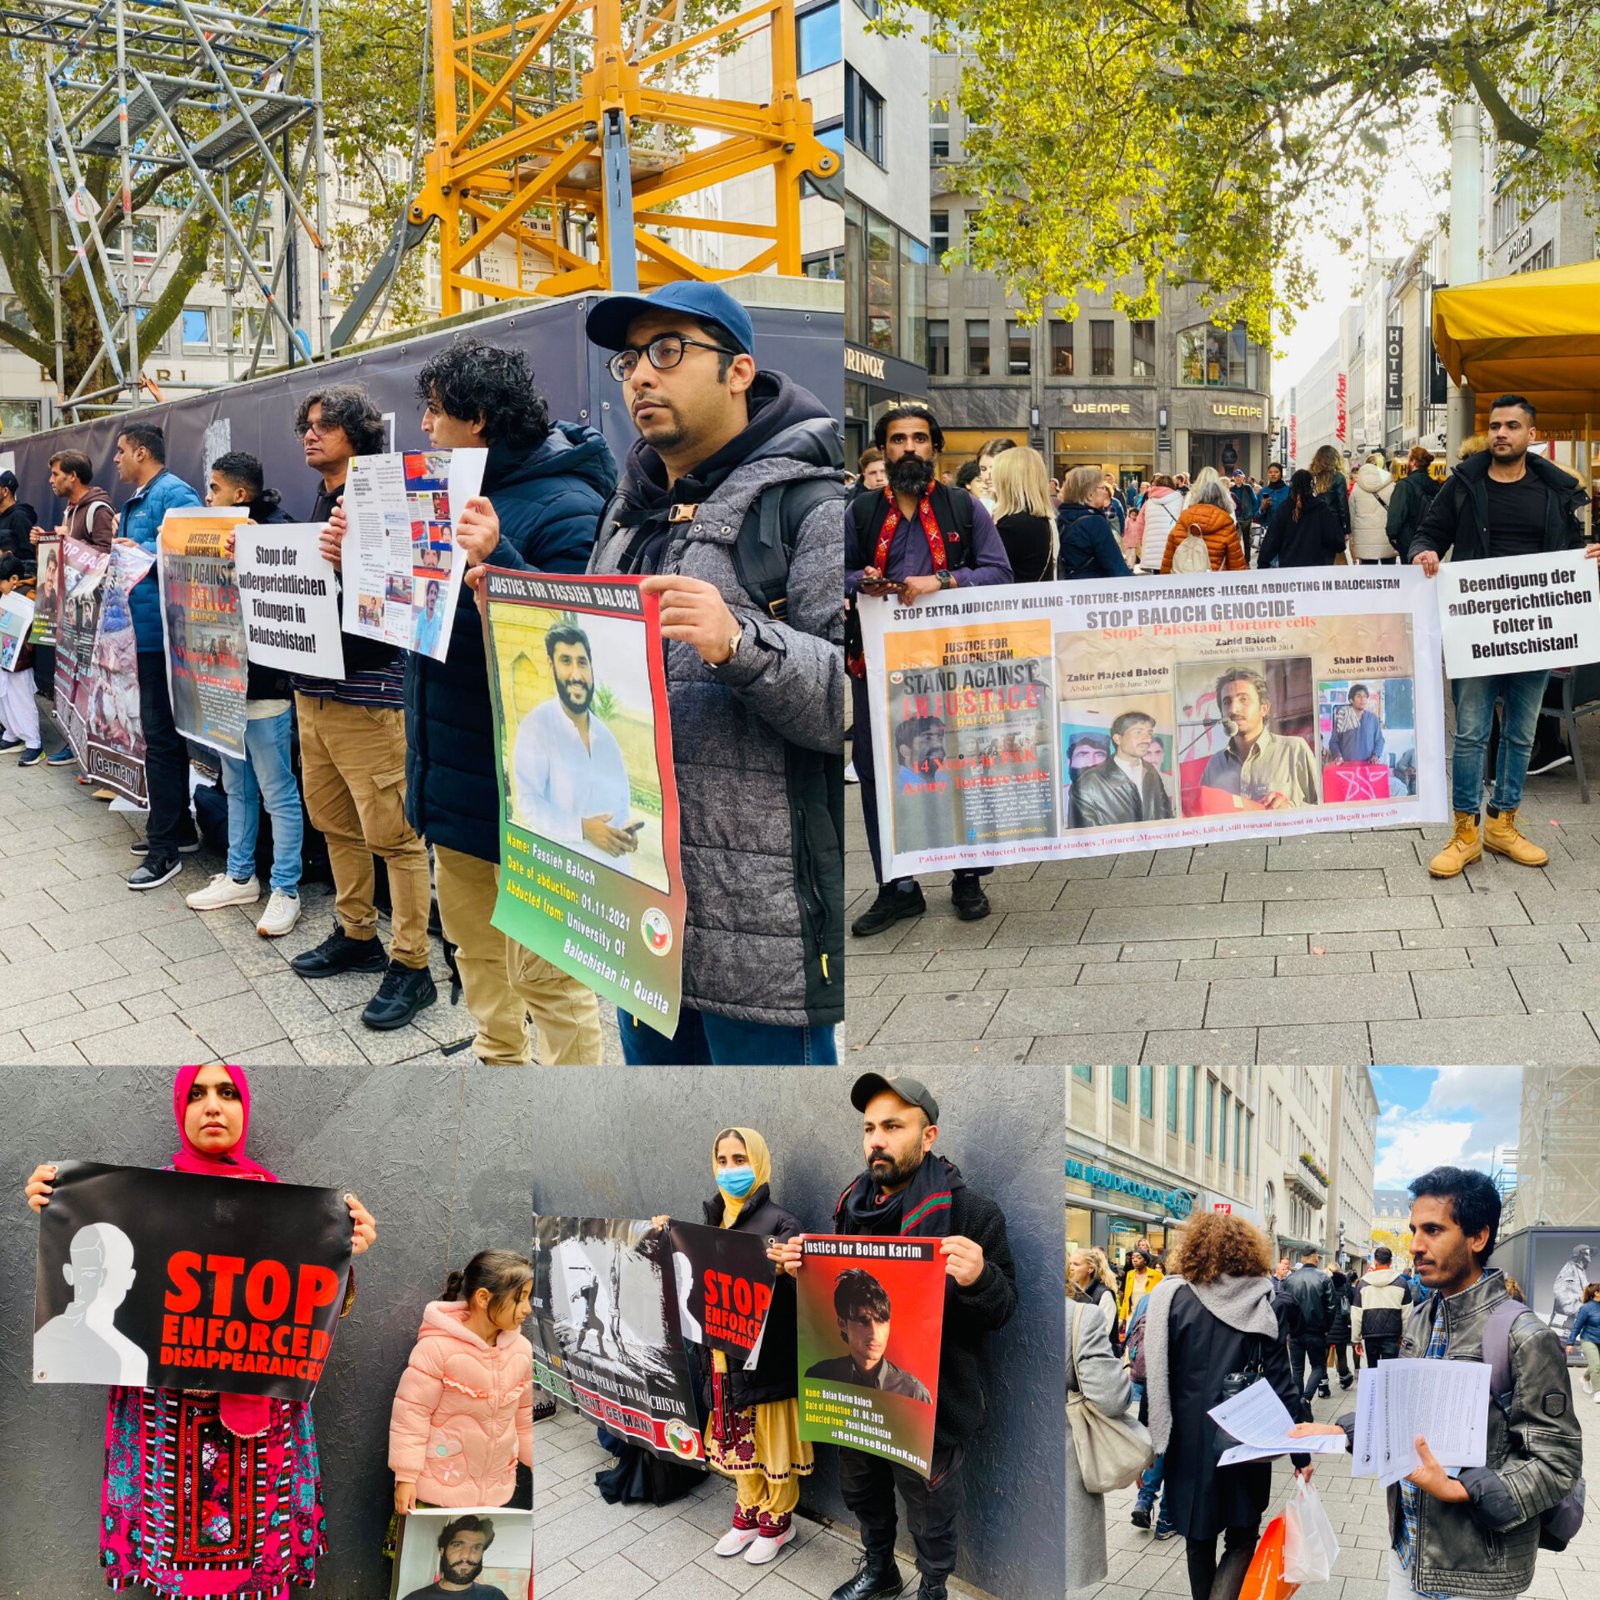 BNM Germany Chapter held protest and run awareness compaign in various cities of Germany | Zrumbesh